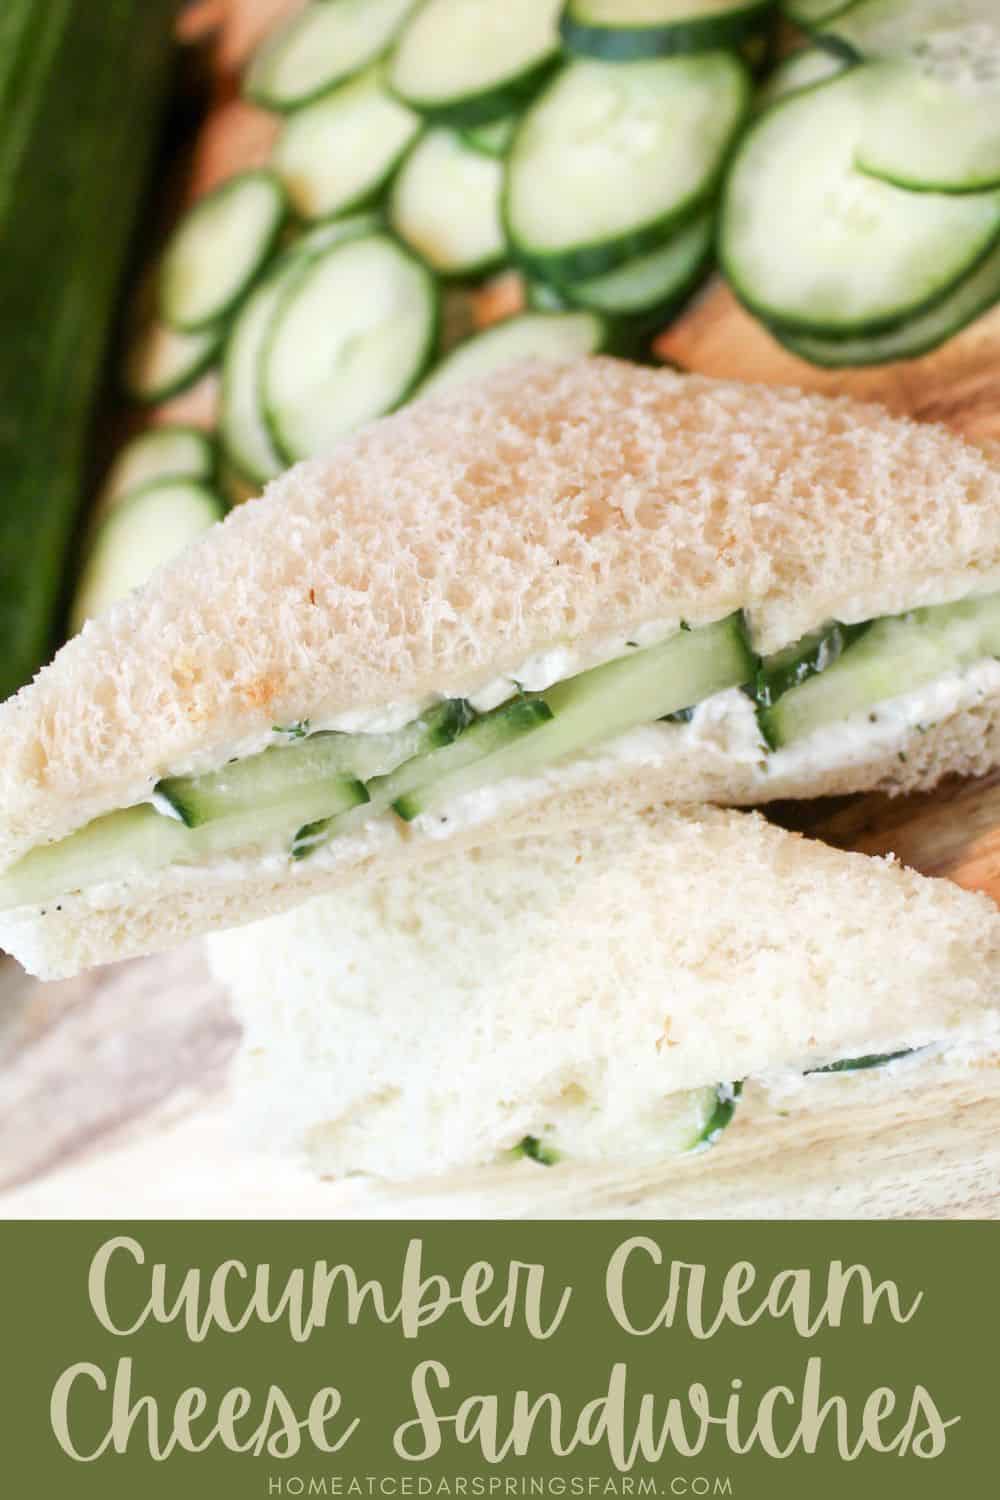 Cucumber sandwich cut in half with text overlay.